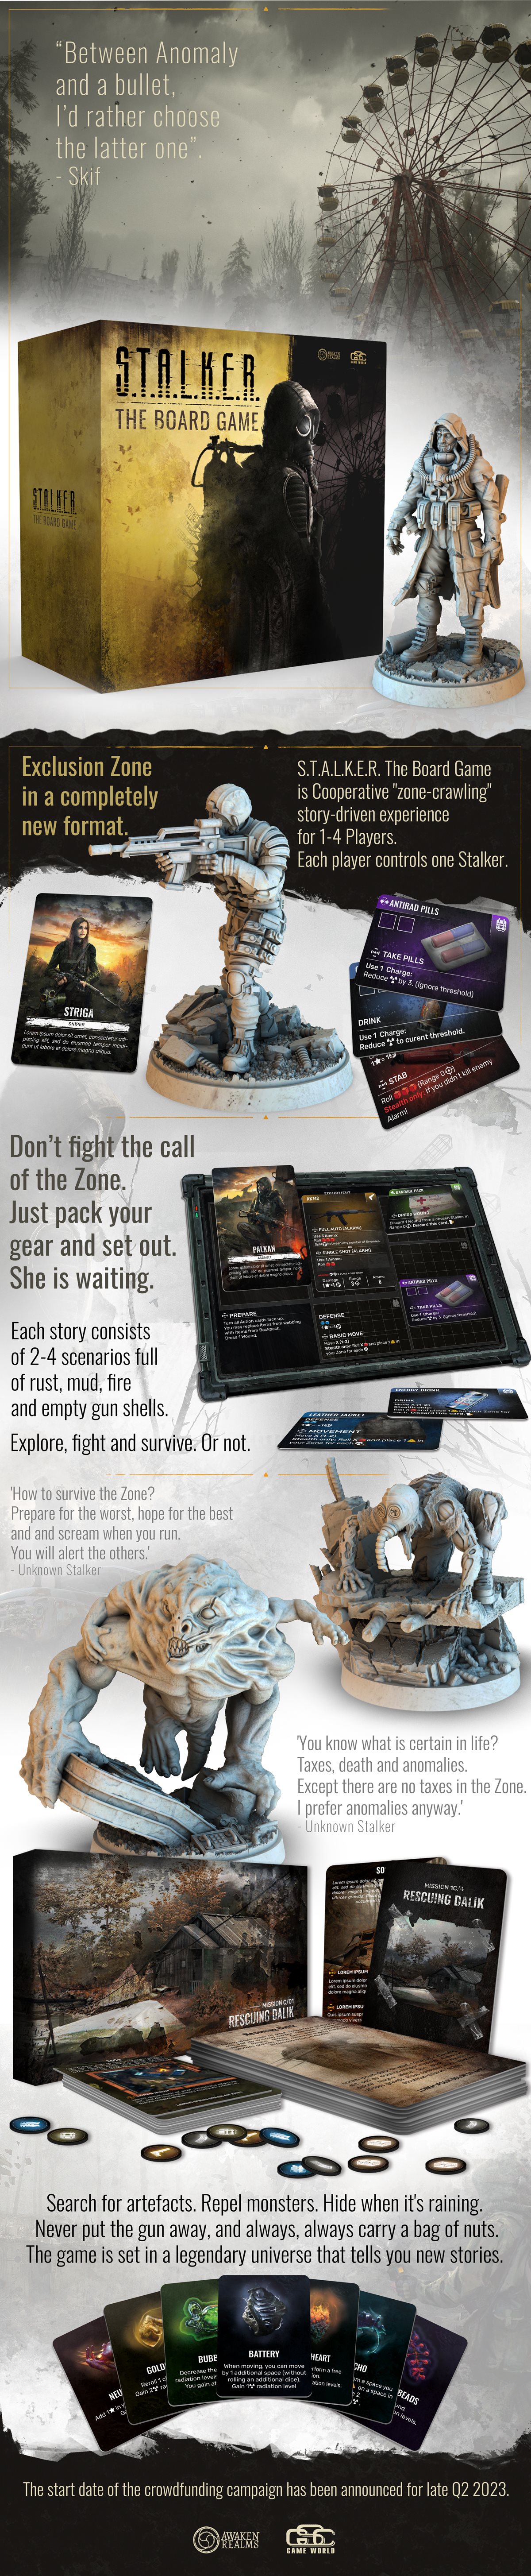 Image detailing the Stalker board game campaign to launch in Q2 2023. Images of cards and miniatures are shown alongside quotes from characters in the game world.